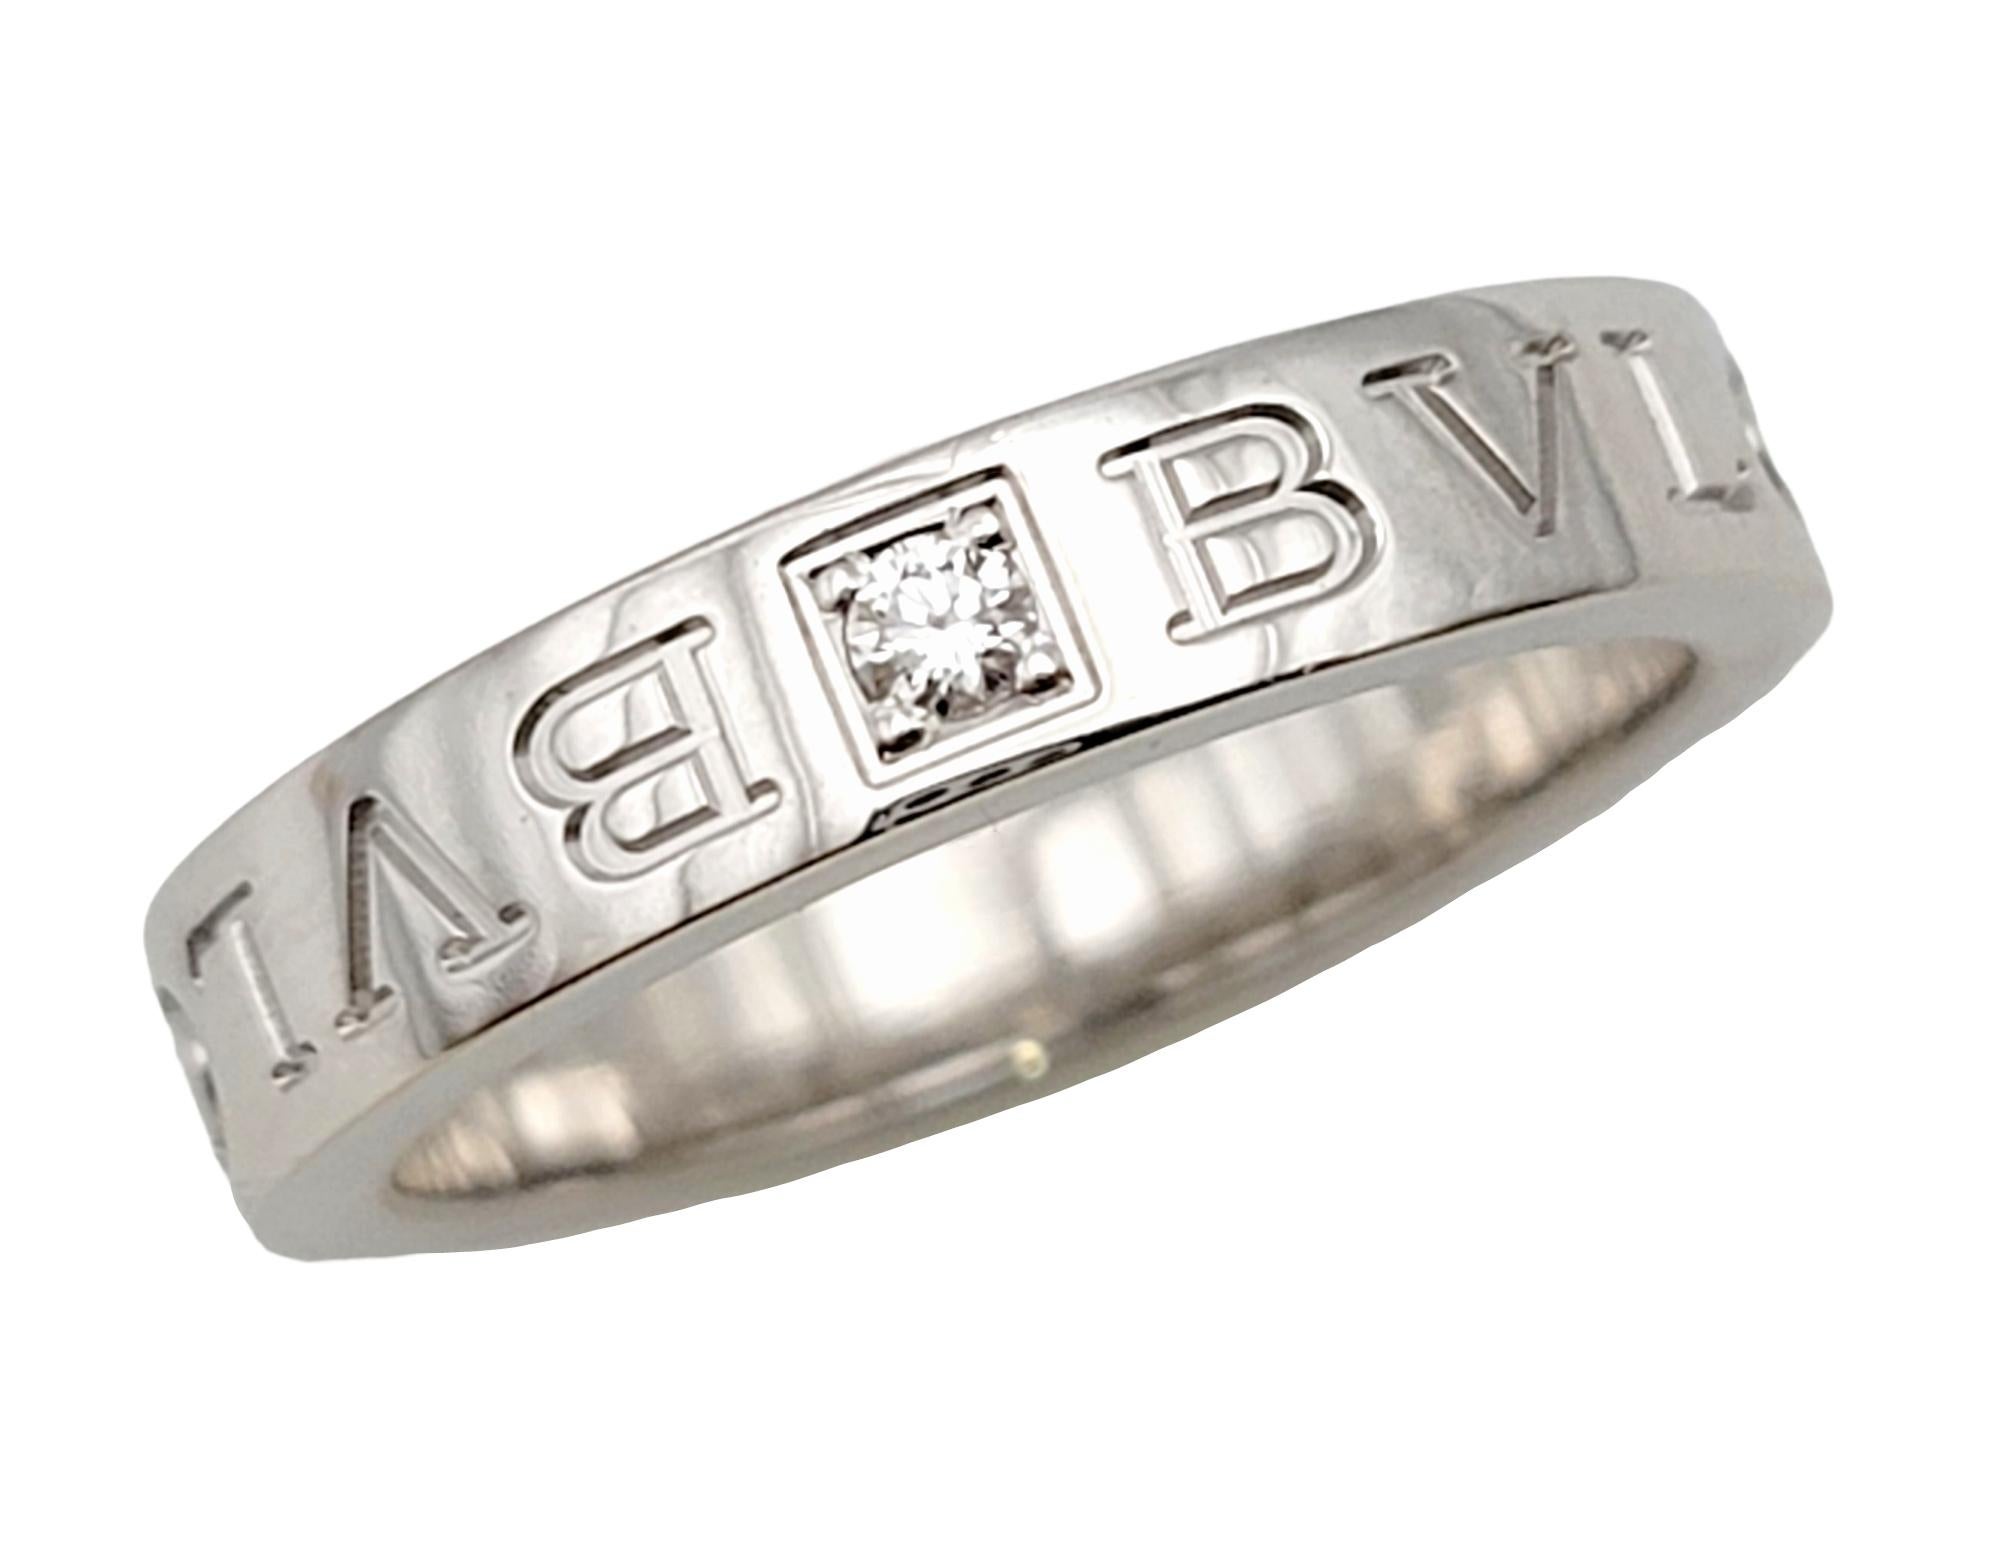 Ring size: 6.5

Sleek and modern 18 karat white gold contemporary designer wedding band ring by Bulgari. Bulgari is an Italian high-end luxury fashion house founded in 1884 and known for its jewelry, watches, fragrances, accessories, and leather